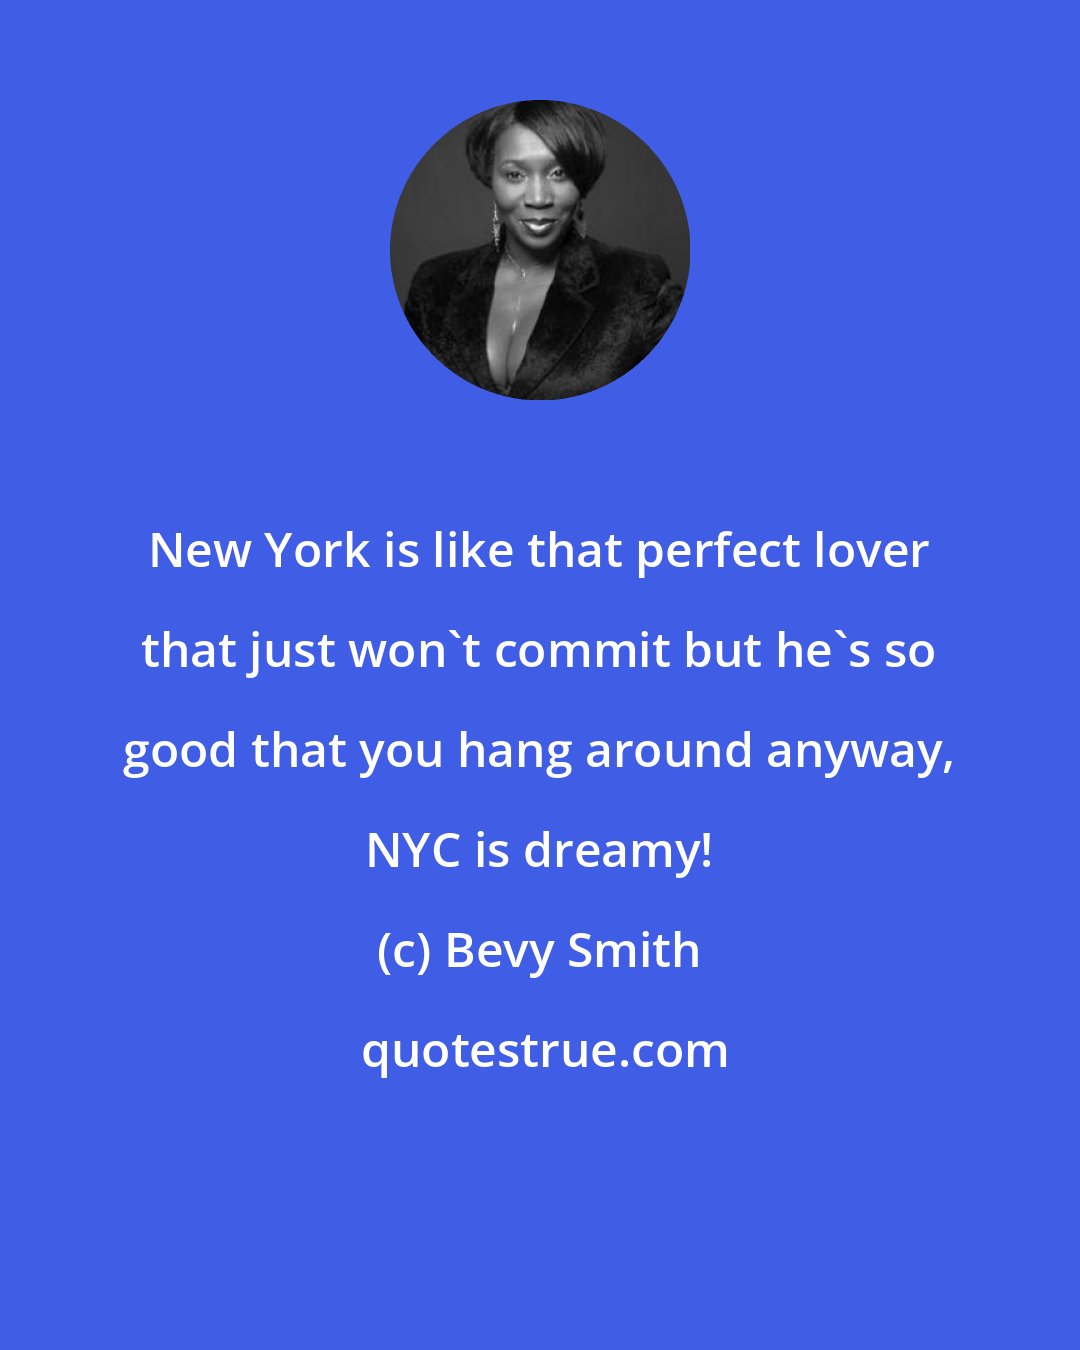 Bevy Smith: New York is like that perfect lover that just won't commit but he's so good that you hang around anyway, NYC is dreamy!